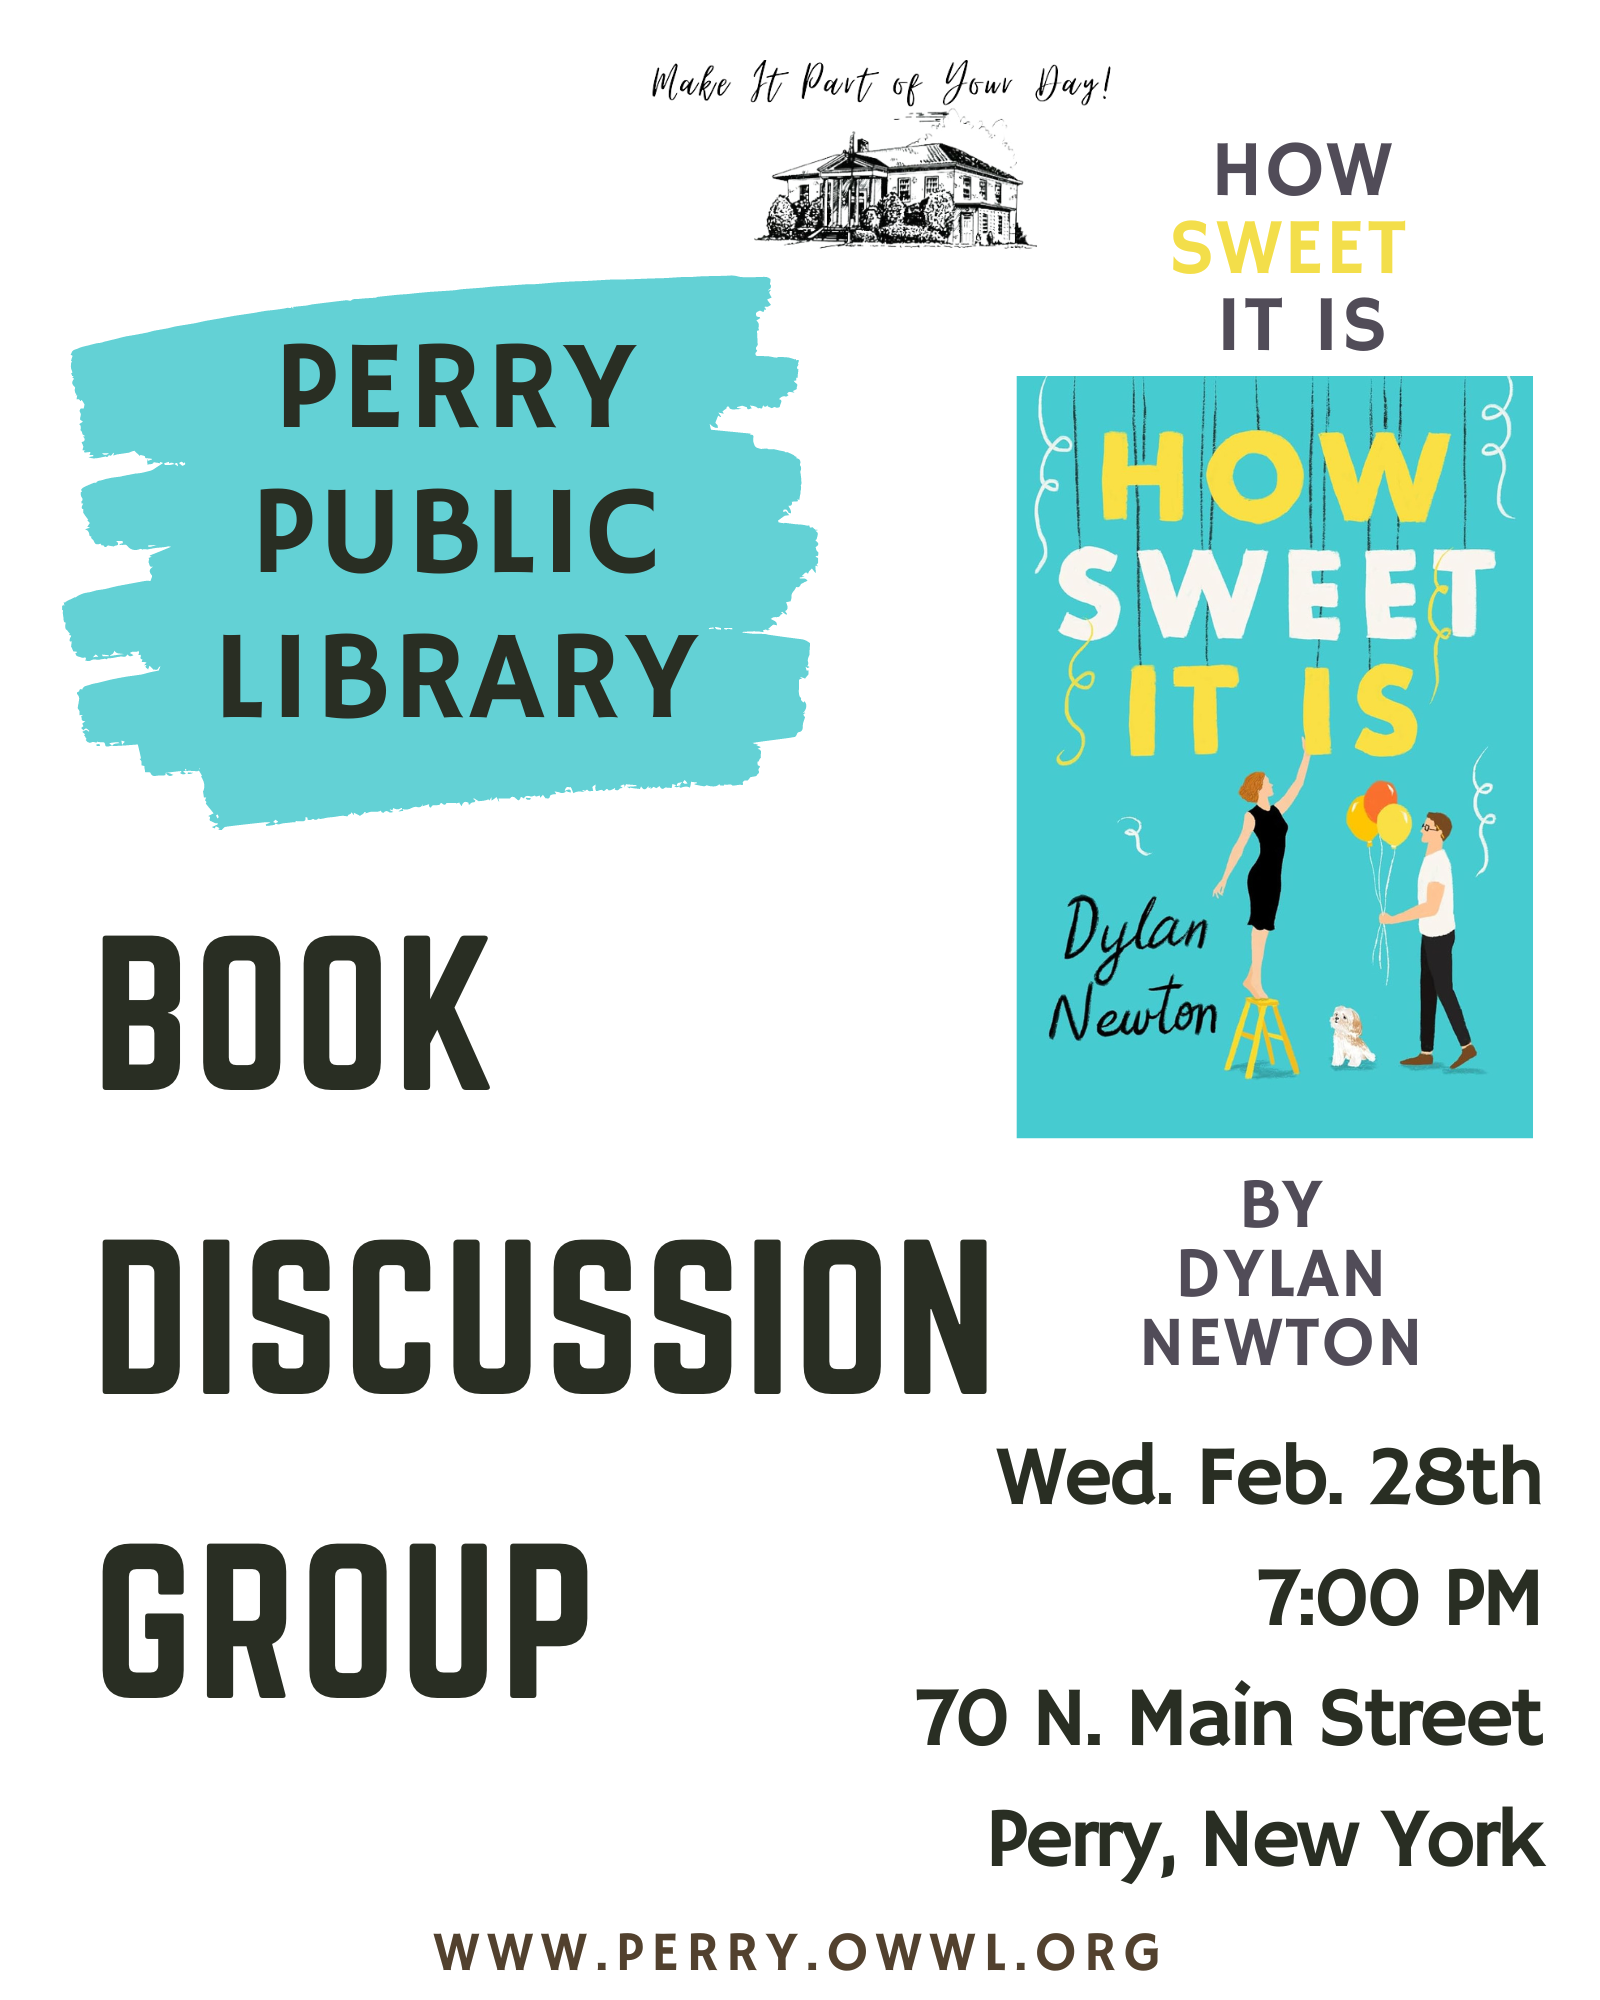 New Date! Wed., March 6th at 7pm Book Discussion Group